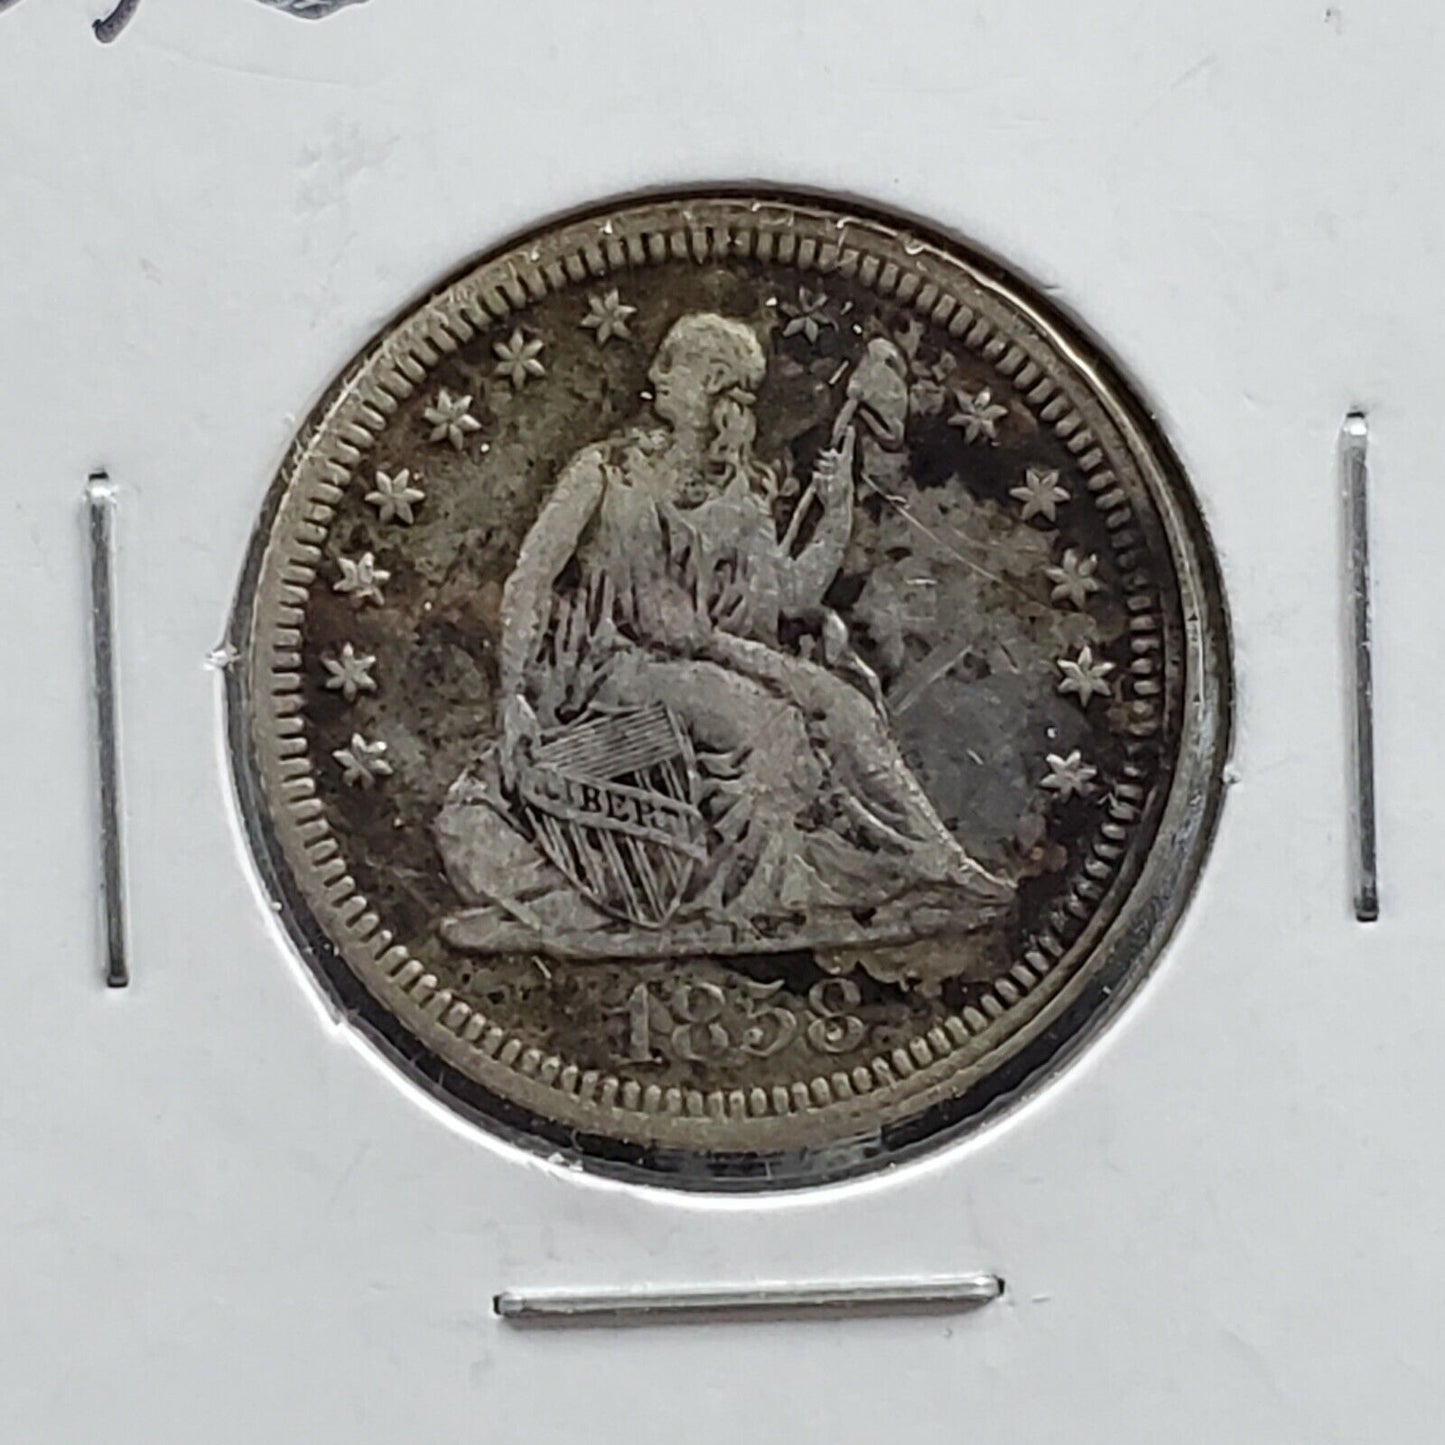 1858 P Seated Liberty Silver Quarter Coin VF Very Fine Condition Some Toning